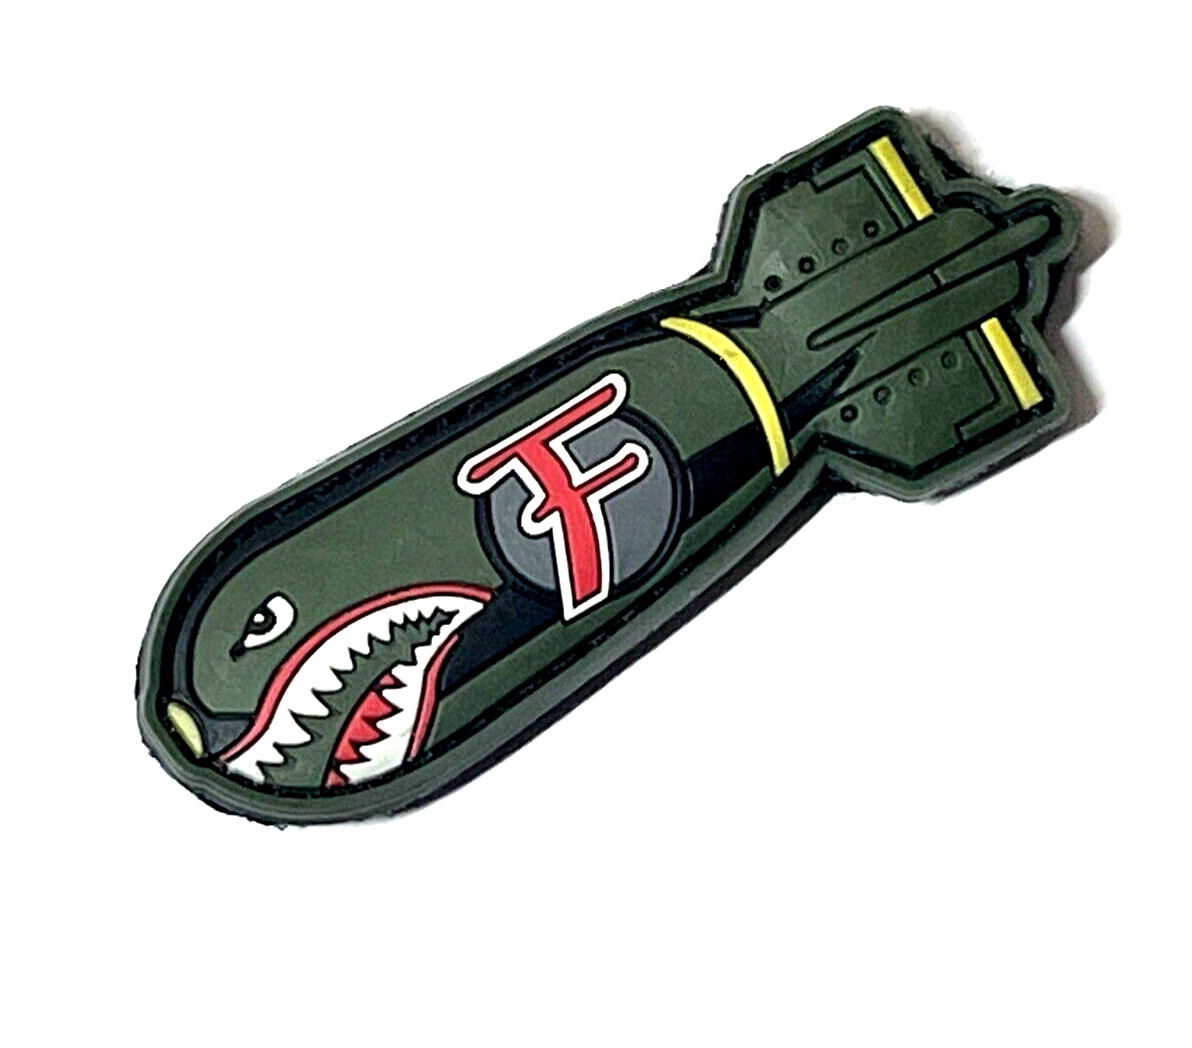 Dropping F Bomb WW2 Style Tactical PVC Morale Patch (Hook & Loop Backing)  New